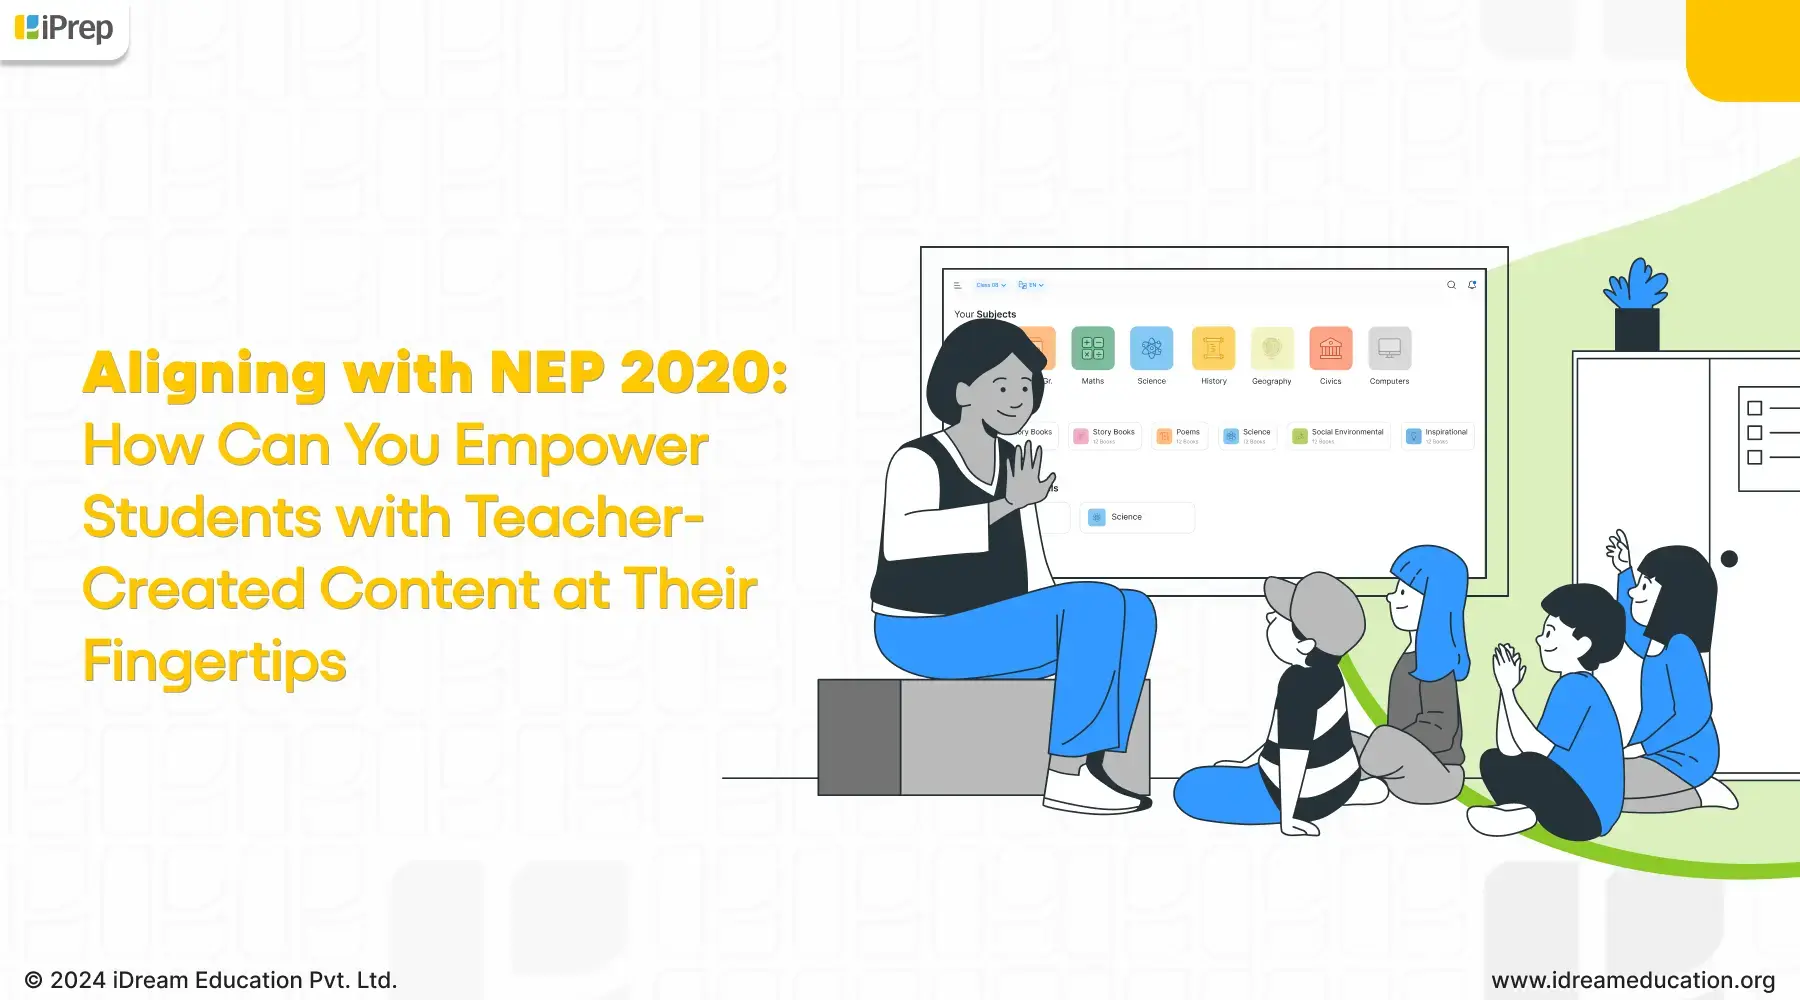 Image Showing iPrep content creation platform designed in alignment with National Education Policy 2020 (NEP 2020) for comprehensive goals for teacher development